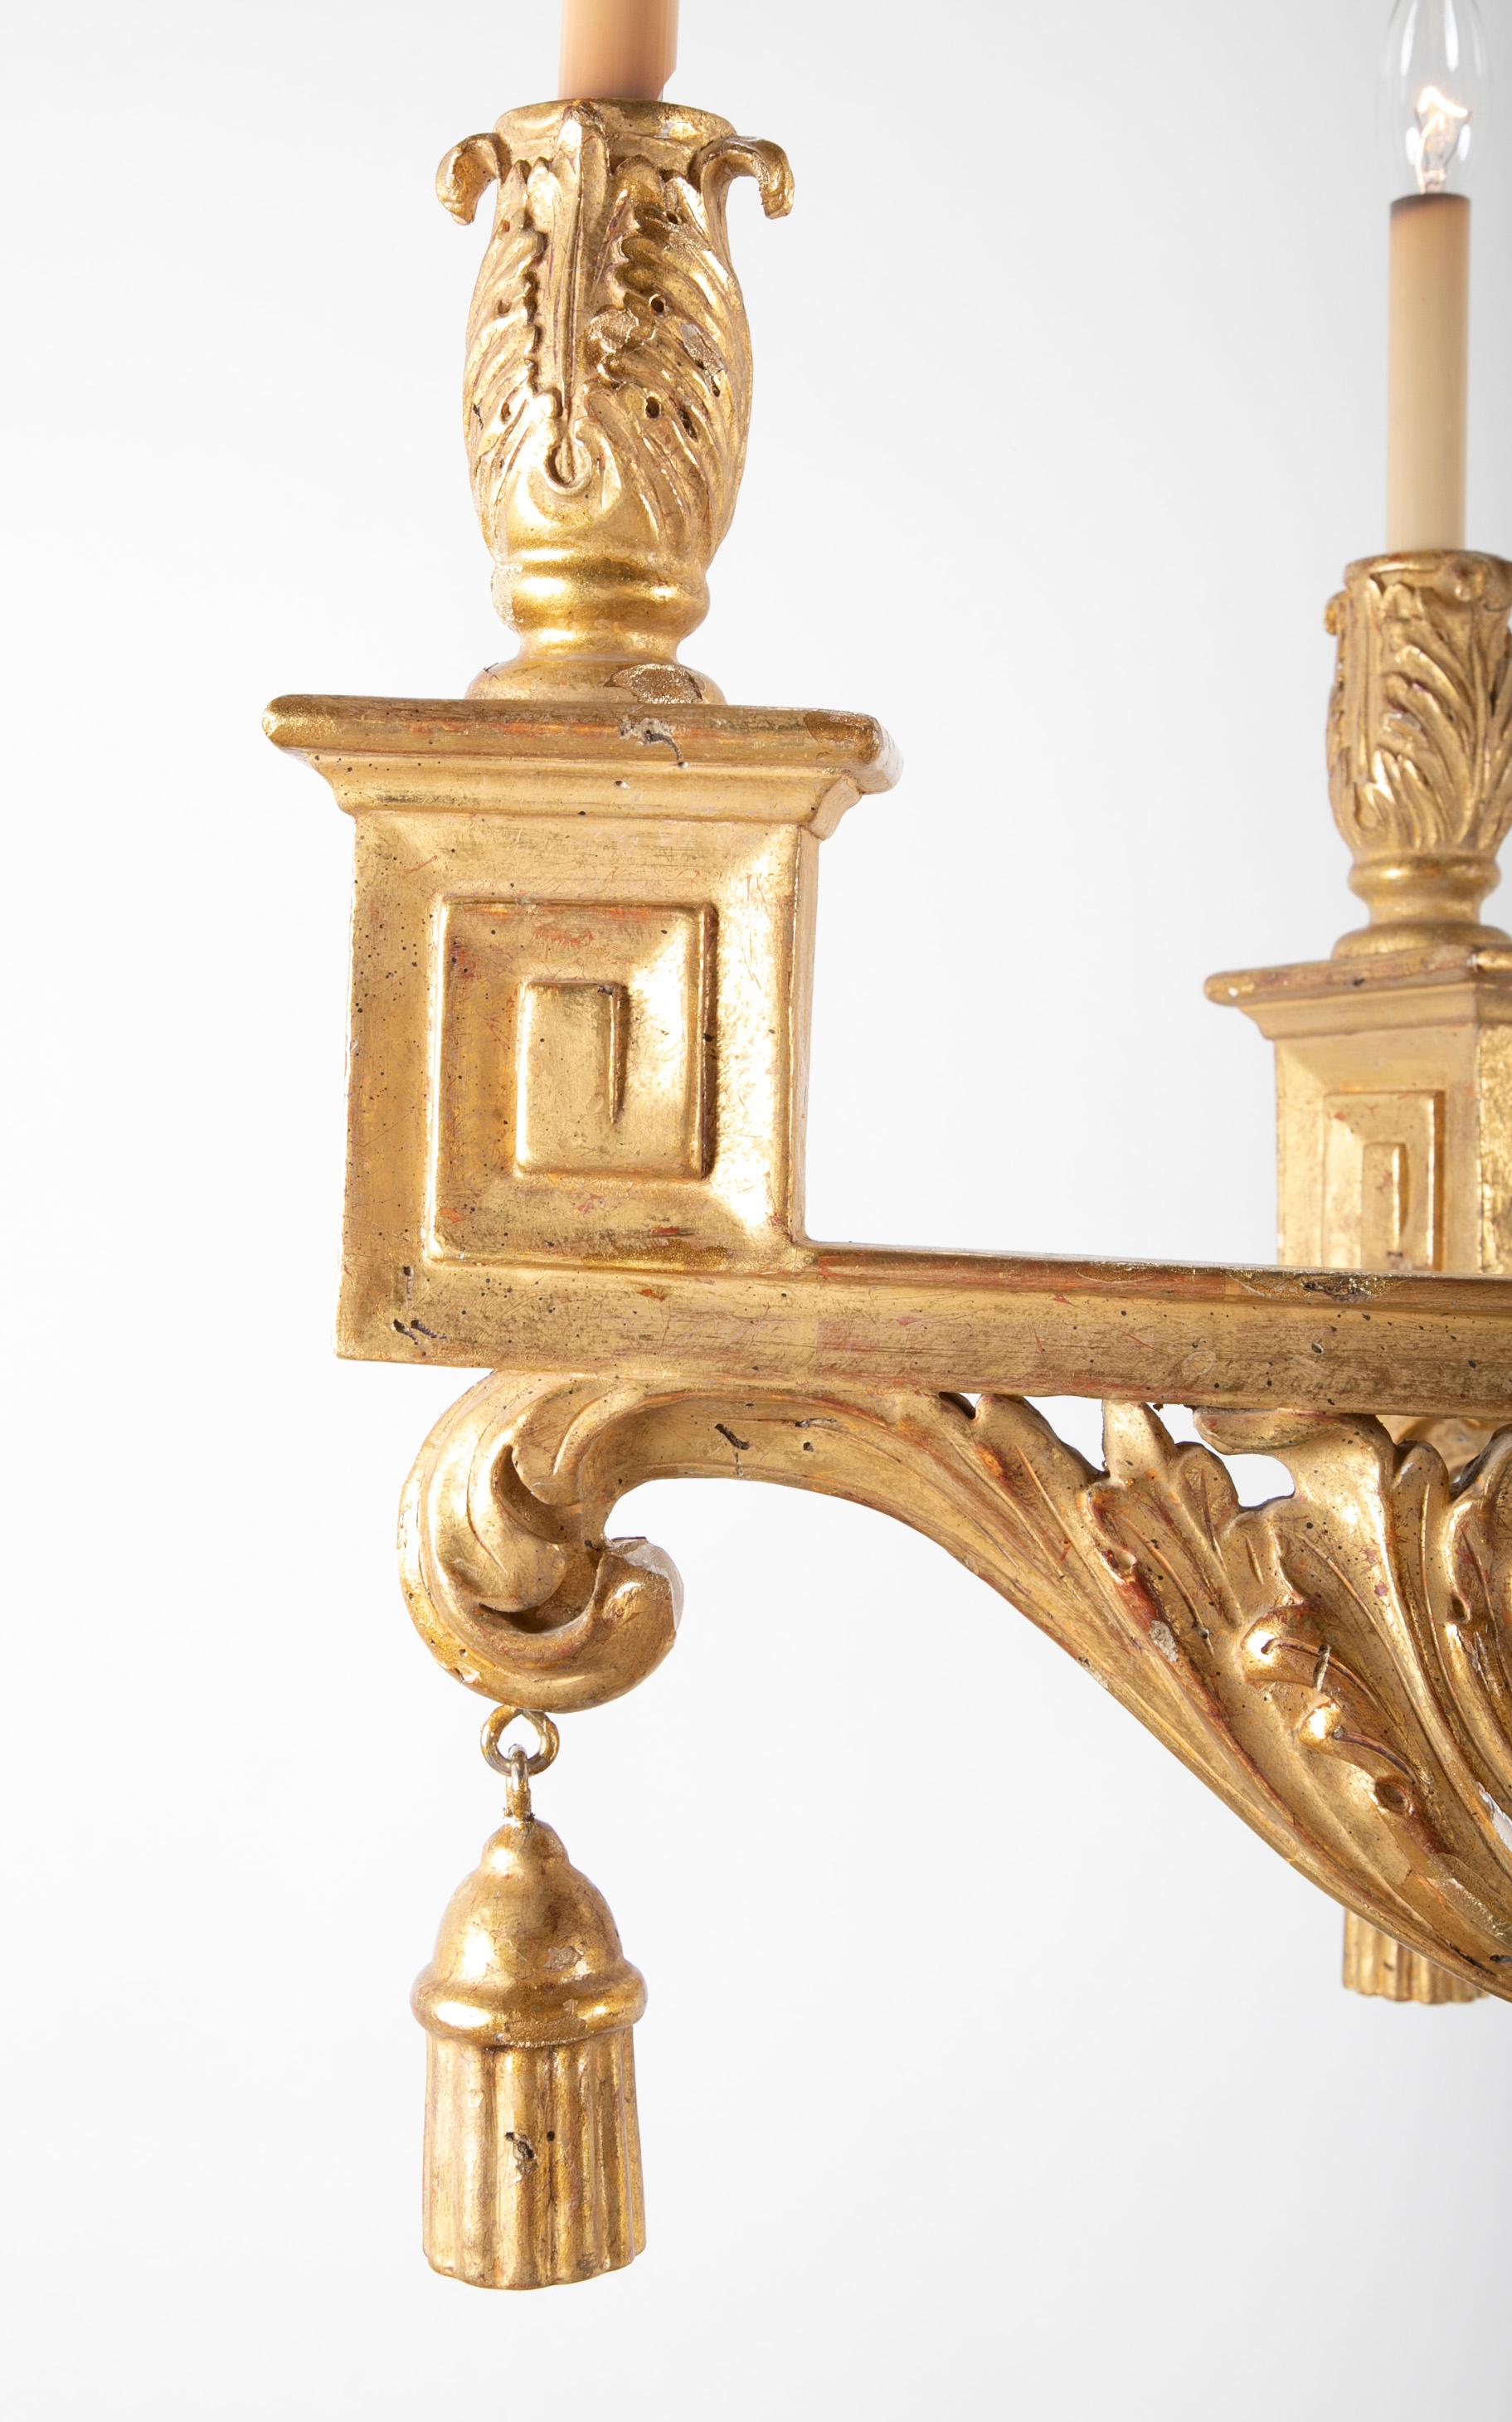 20th Century Continental Carved and Gilded Classical Chandelier with Drop Finial